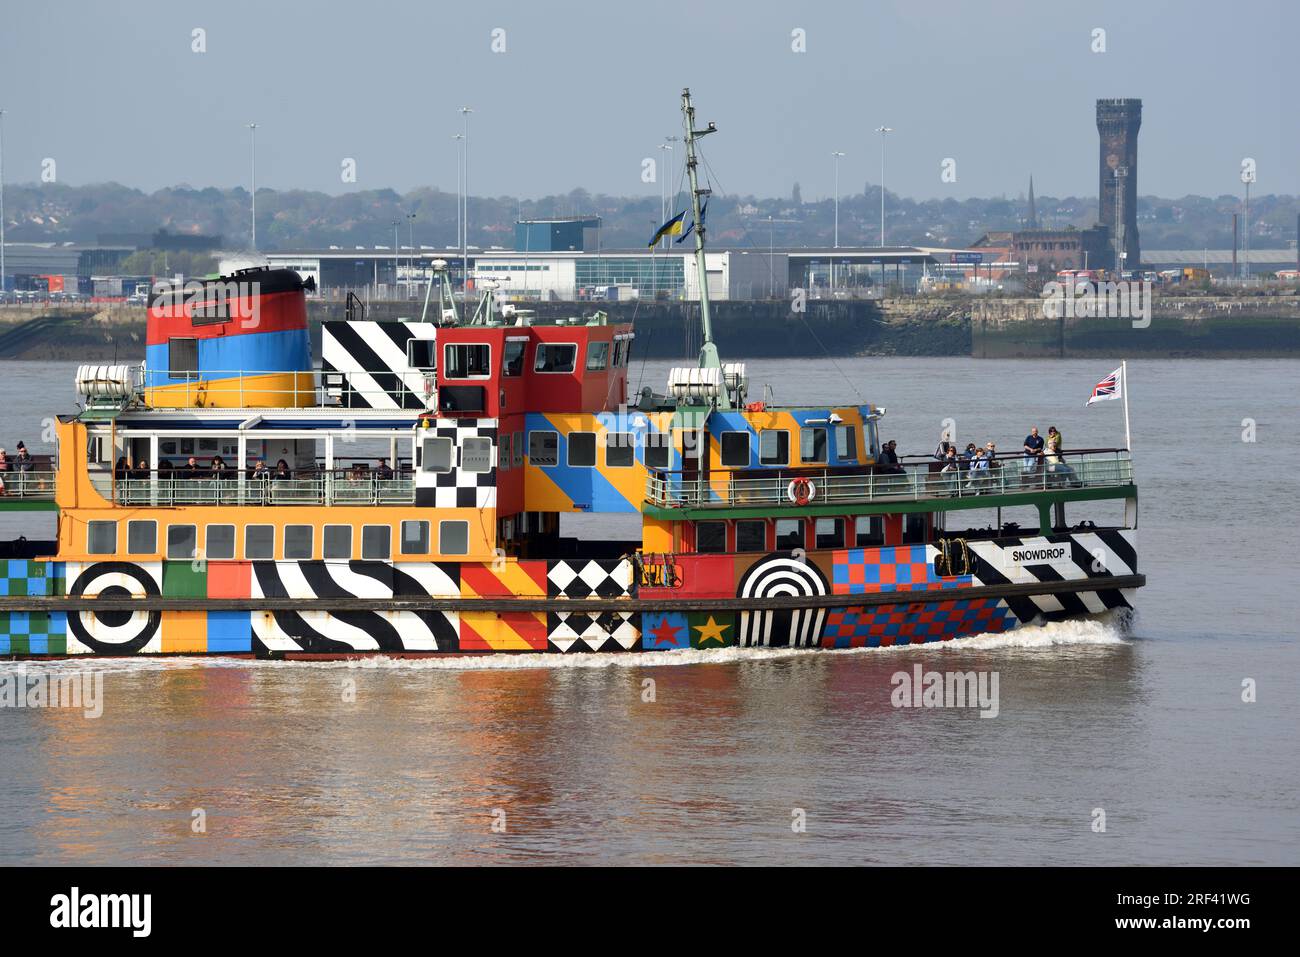 Colourful or Multicoloured Mersey Ferry or Ferryboat Across the Mersey River between Liverpool and Birkenhead Stock Photo